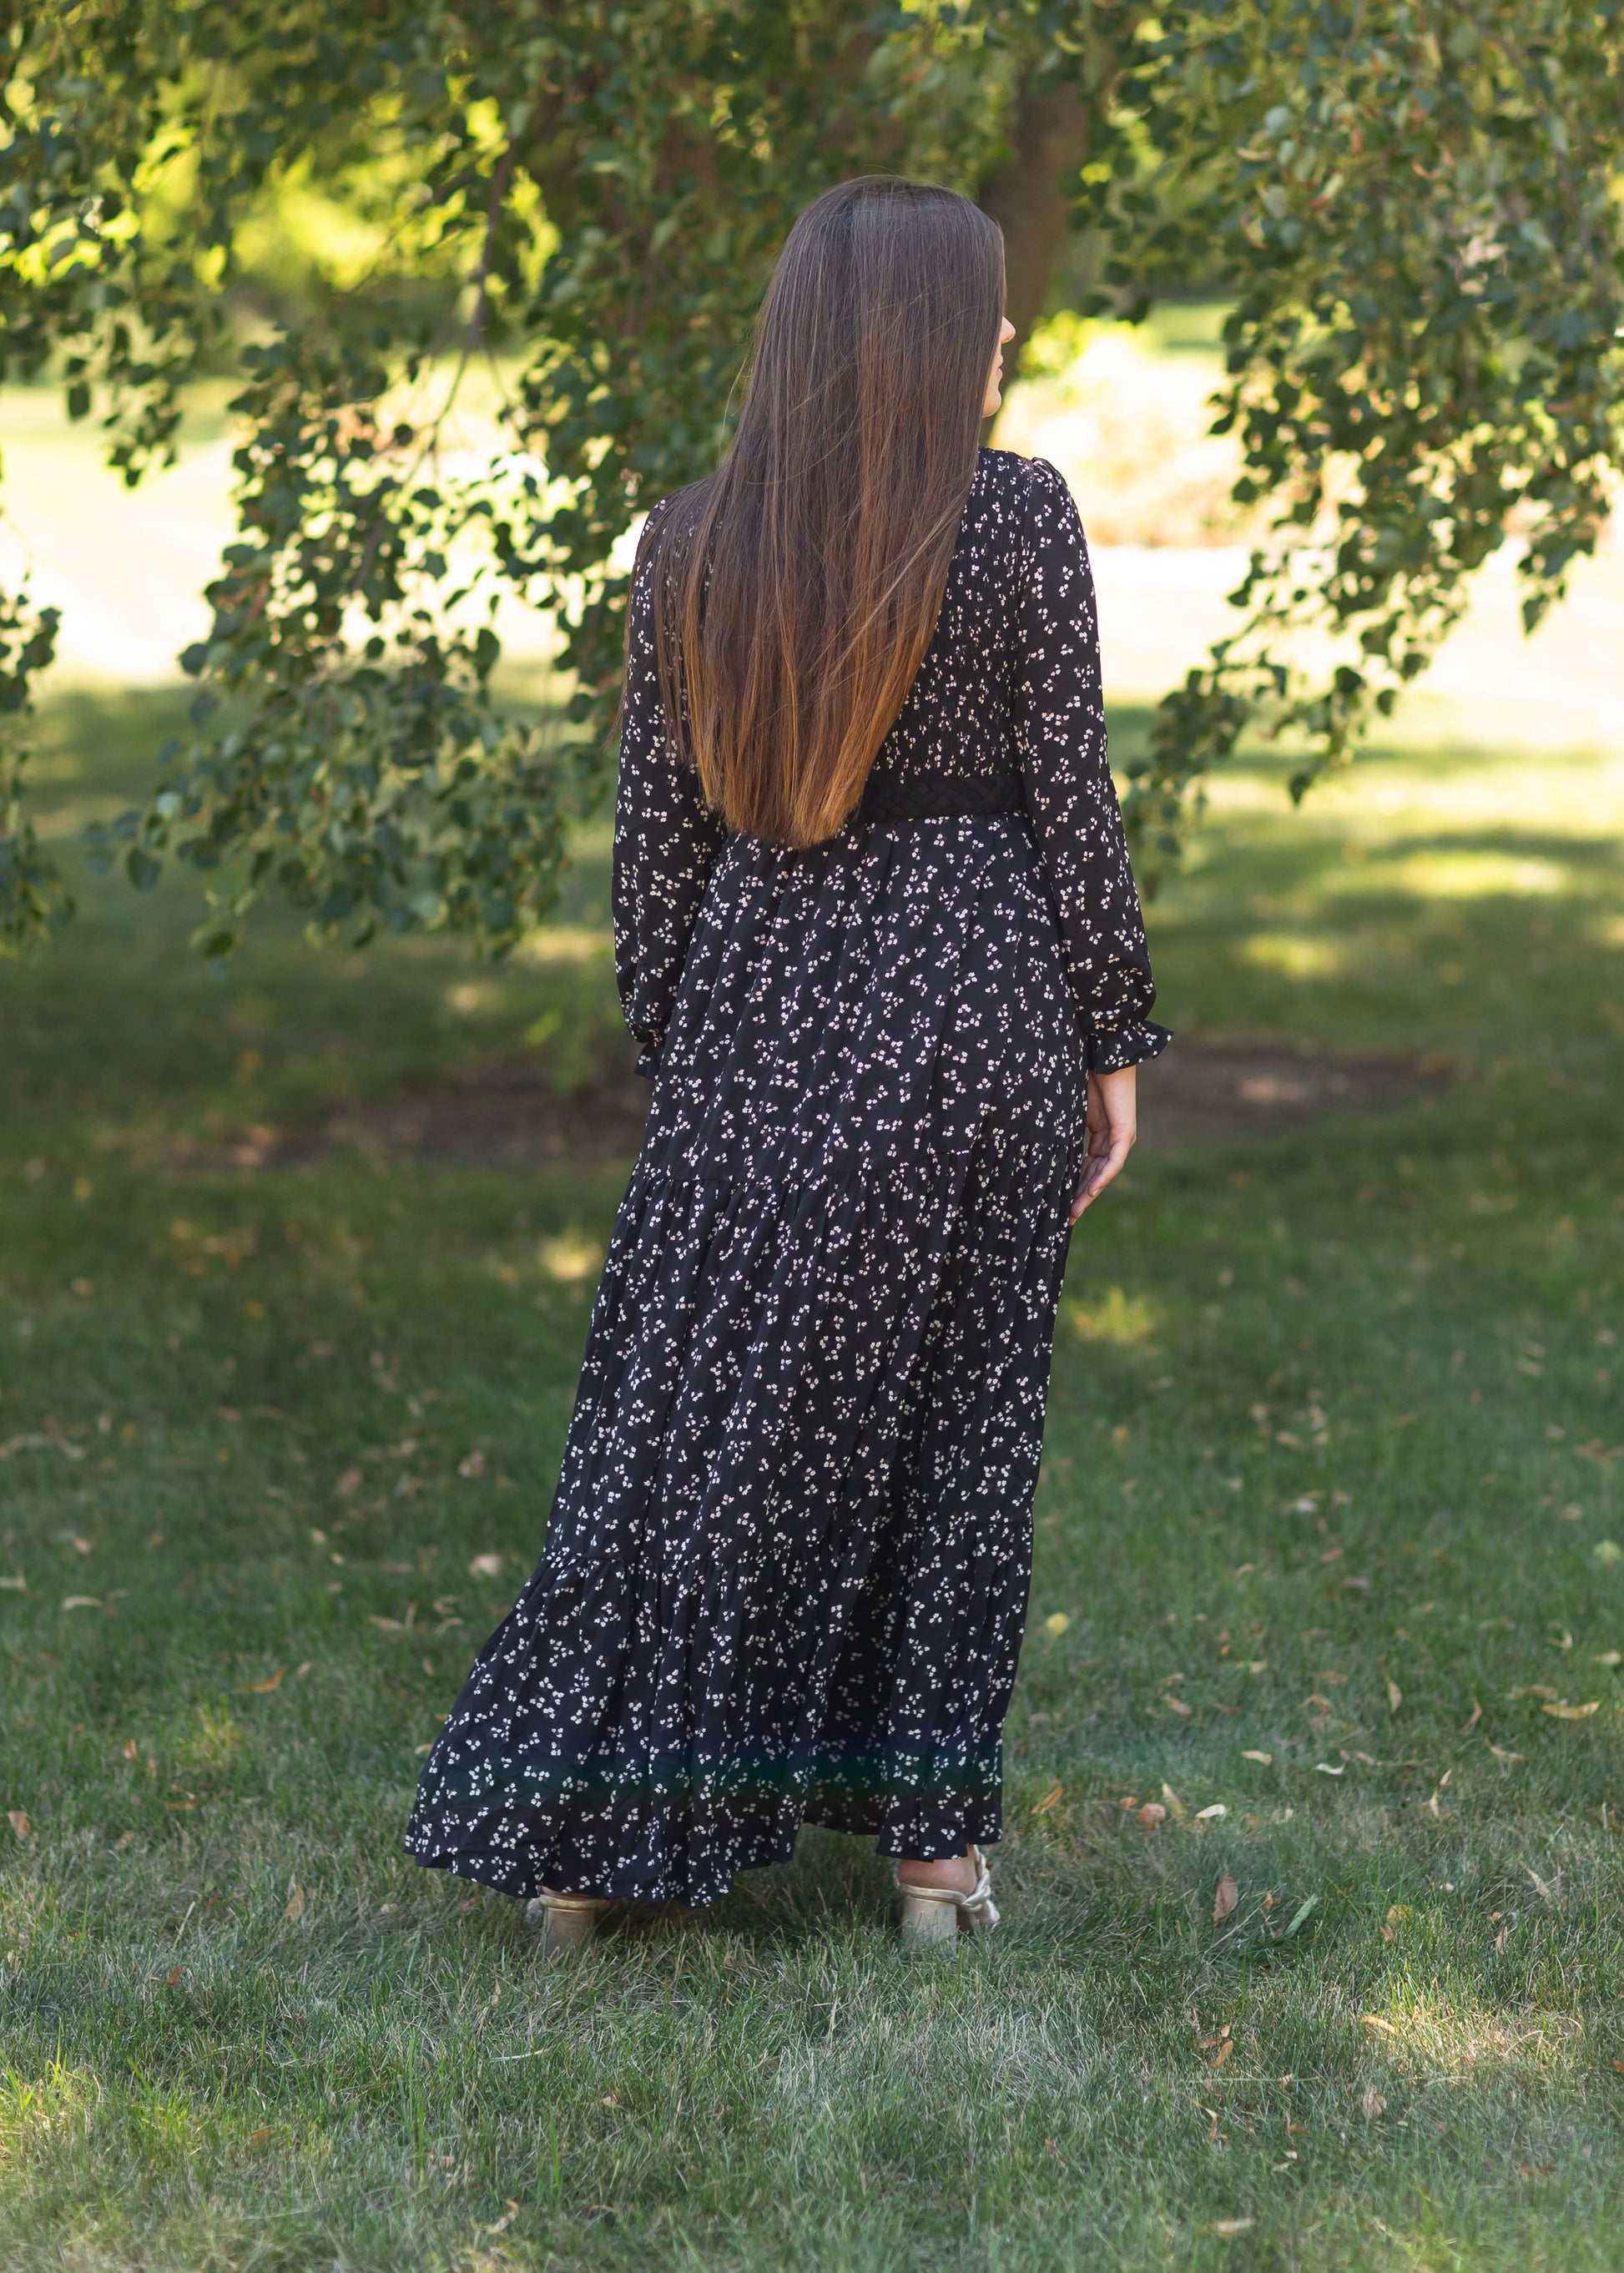 An Inherit Exclusive, the Aurora Floral Long Sleeve Maxi Dress is a fully lined true maxi dress we know you're going to love! This dress comes in either a black or ivory base with an allover floral pattern. The skirt has subtle tiers and the ruffle detail on the sleeves add a touch of flair. The smocked bodice in very comfortable and the modest v-neck adds a feminine touch!